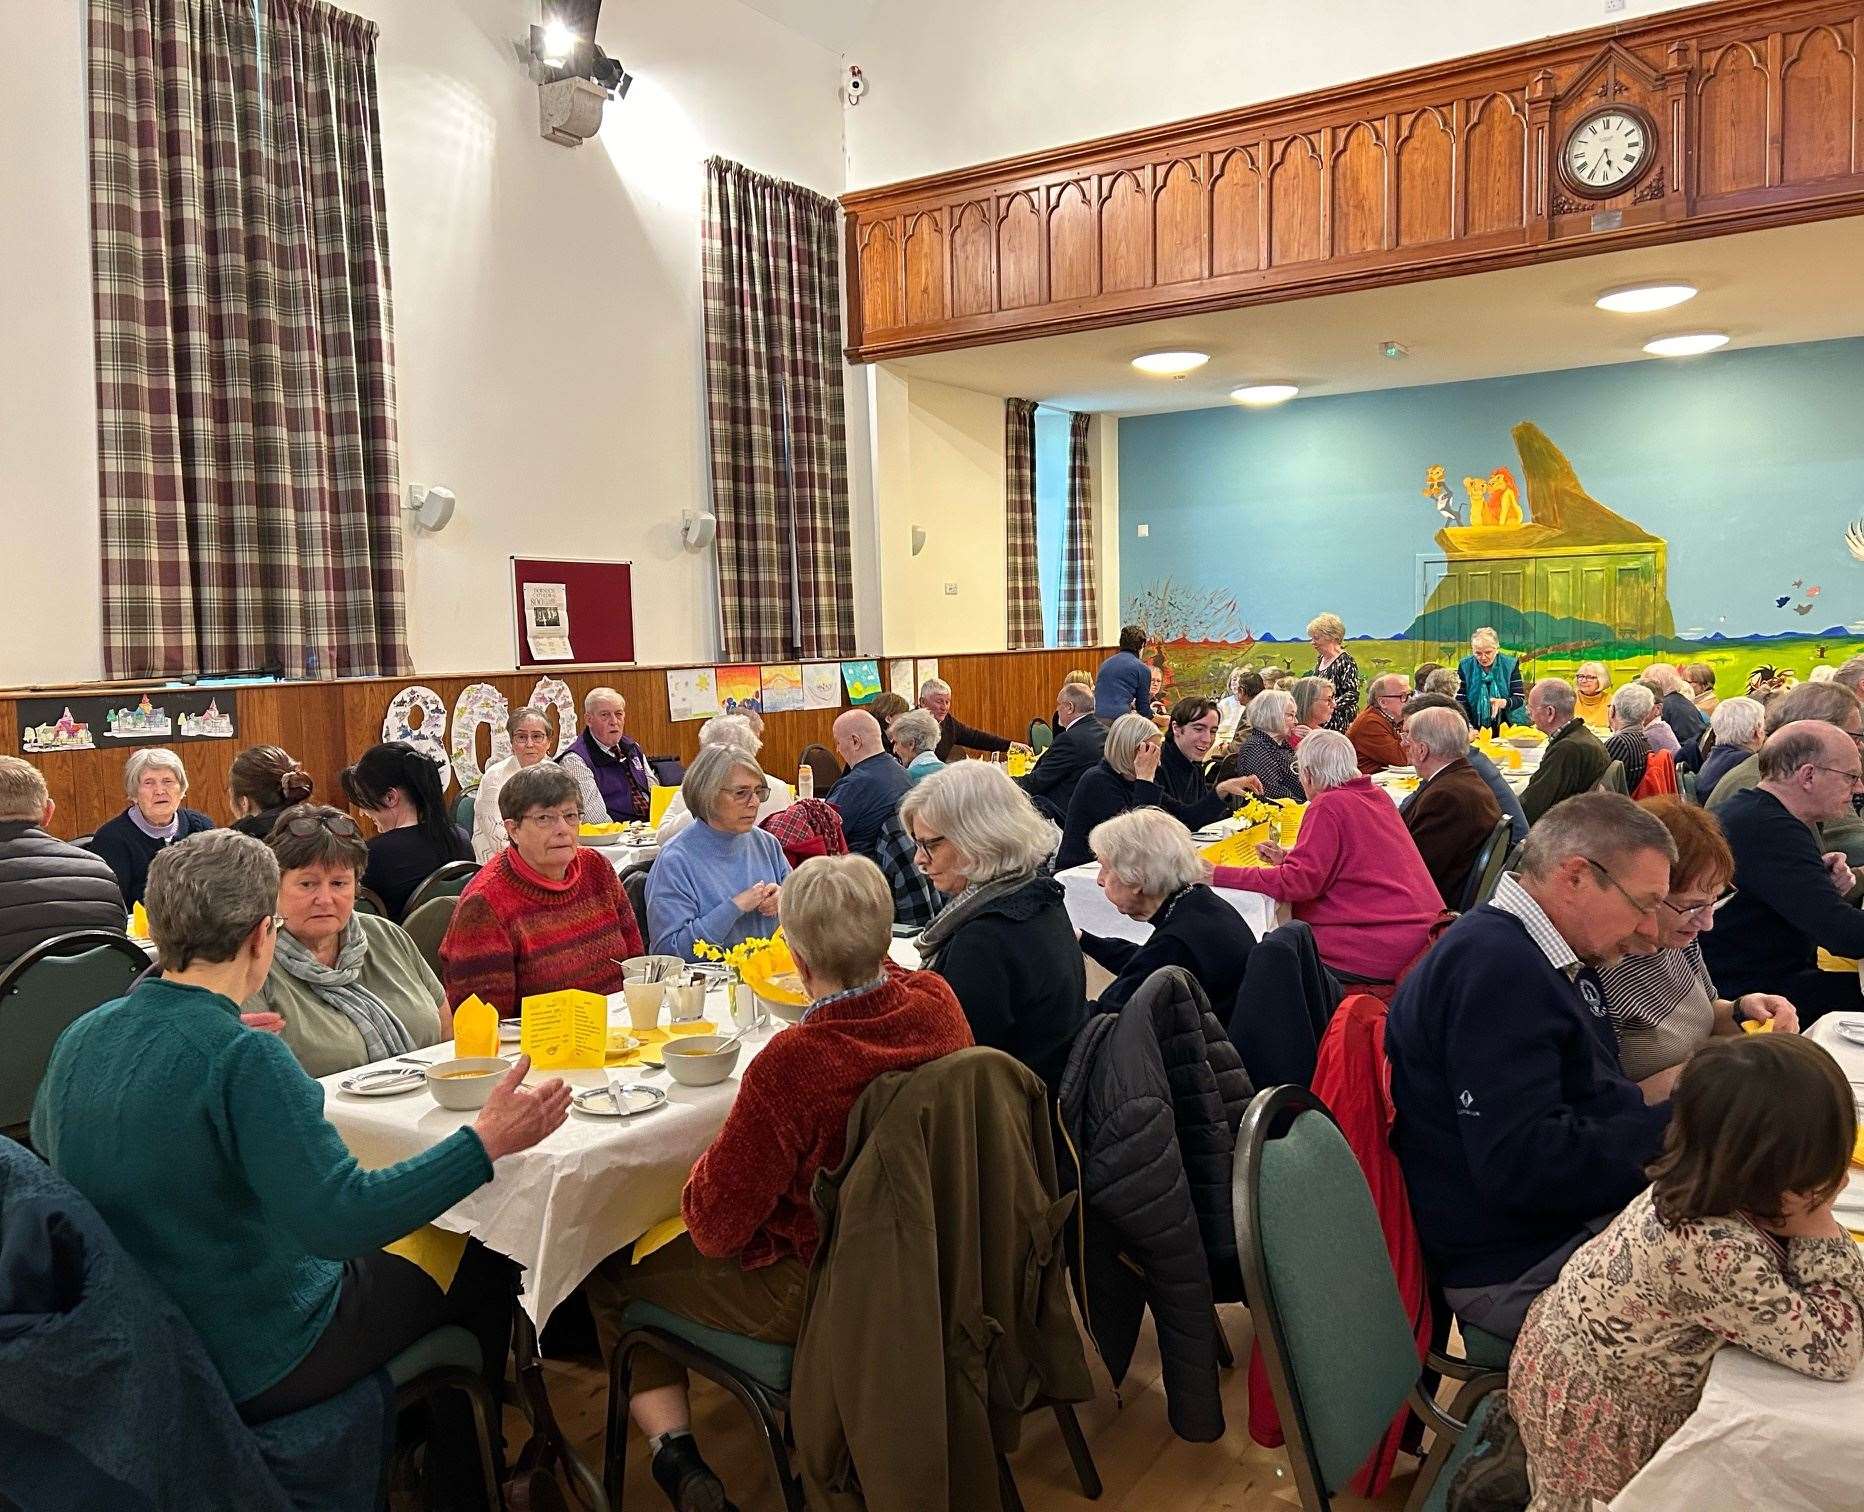 A large crowd filled the West Church Hall for the fundraising lunch.